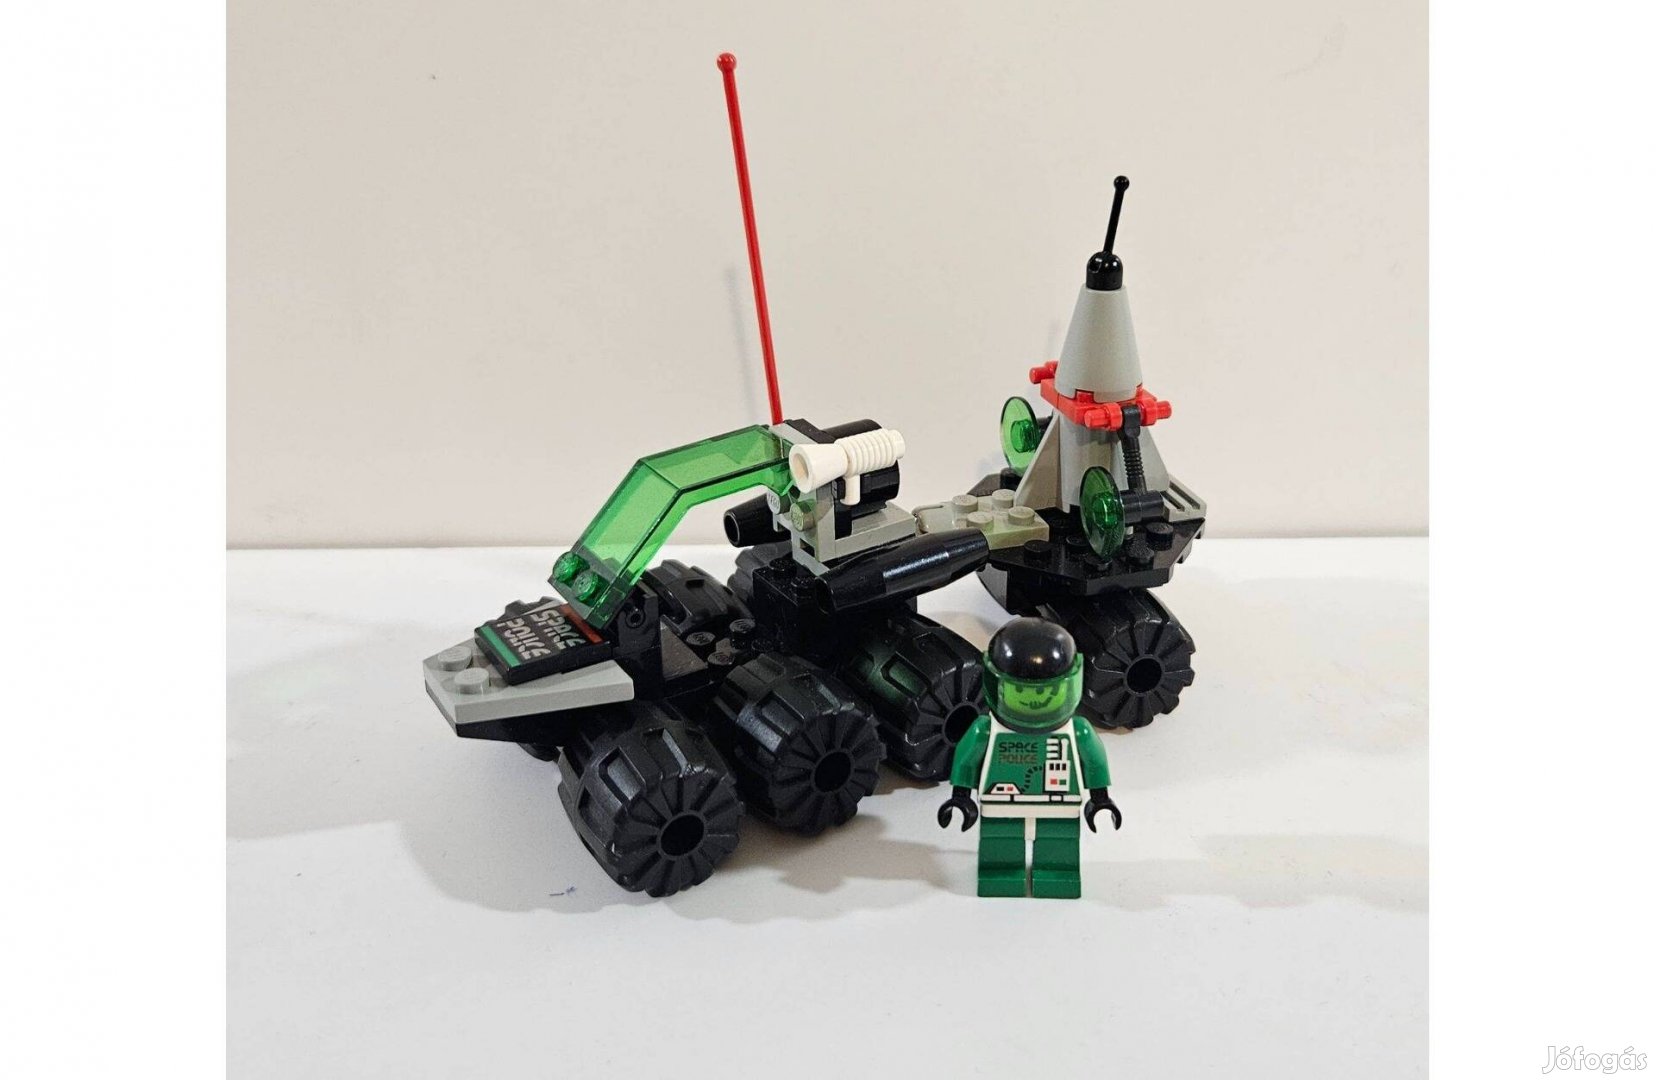 LEGO Space - Space Police II - 6852 - Sonar Security